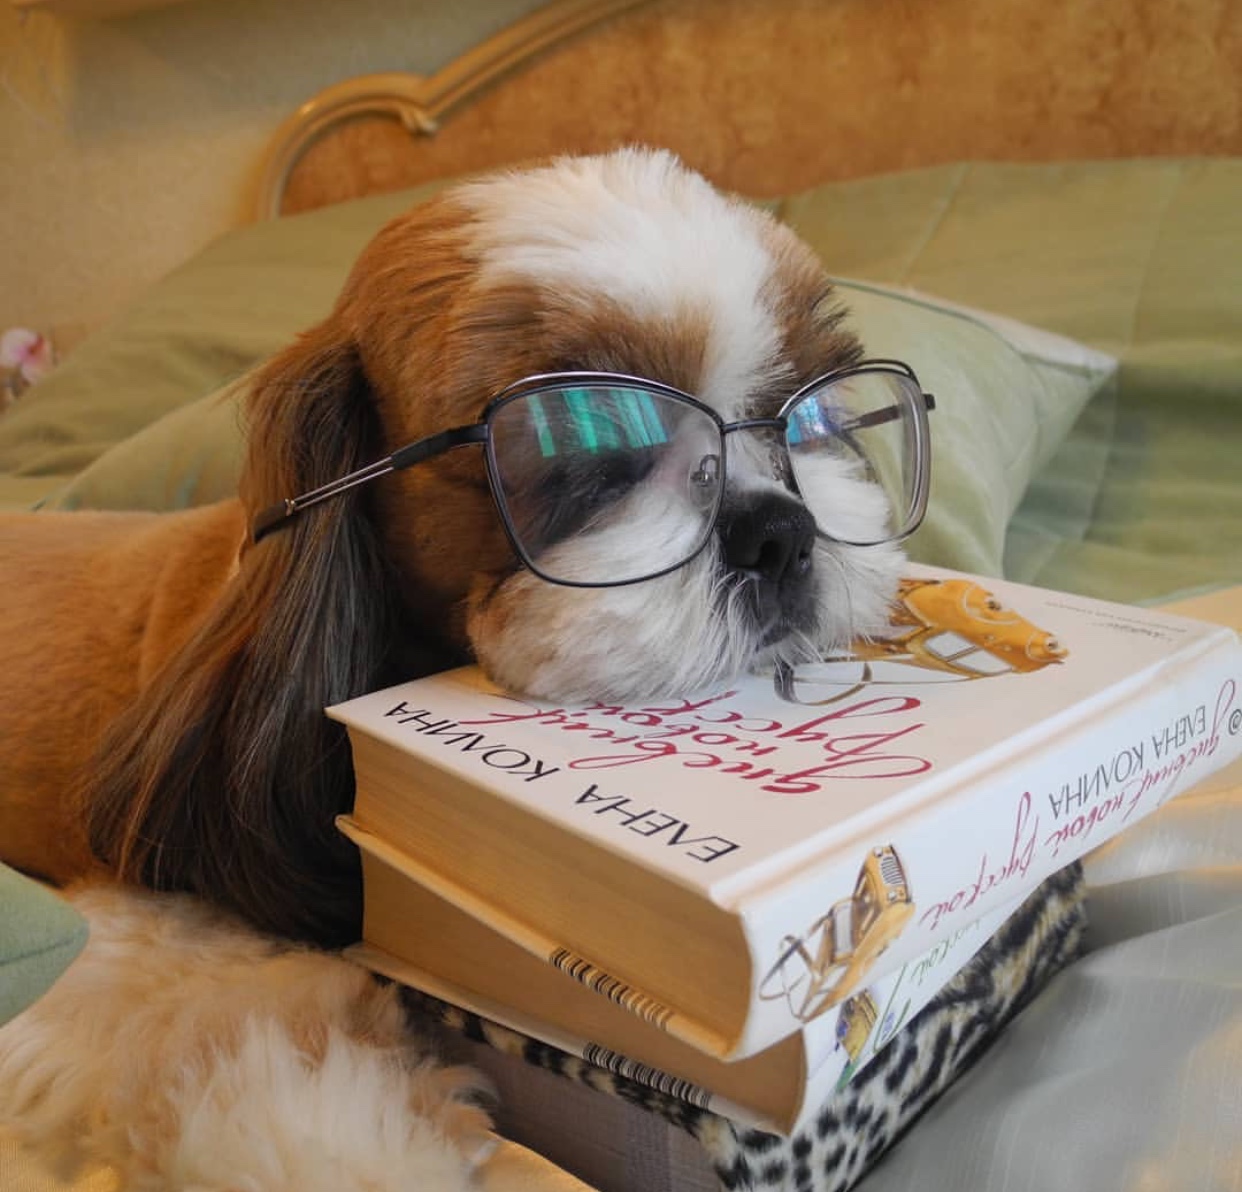 A Shih Tzu wearing glasses while lying on the bed with its face is on top of the books